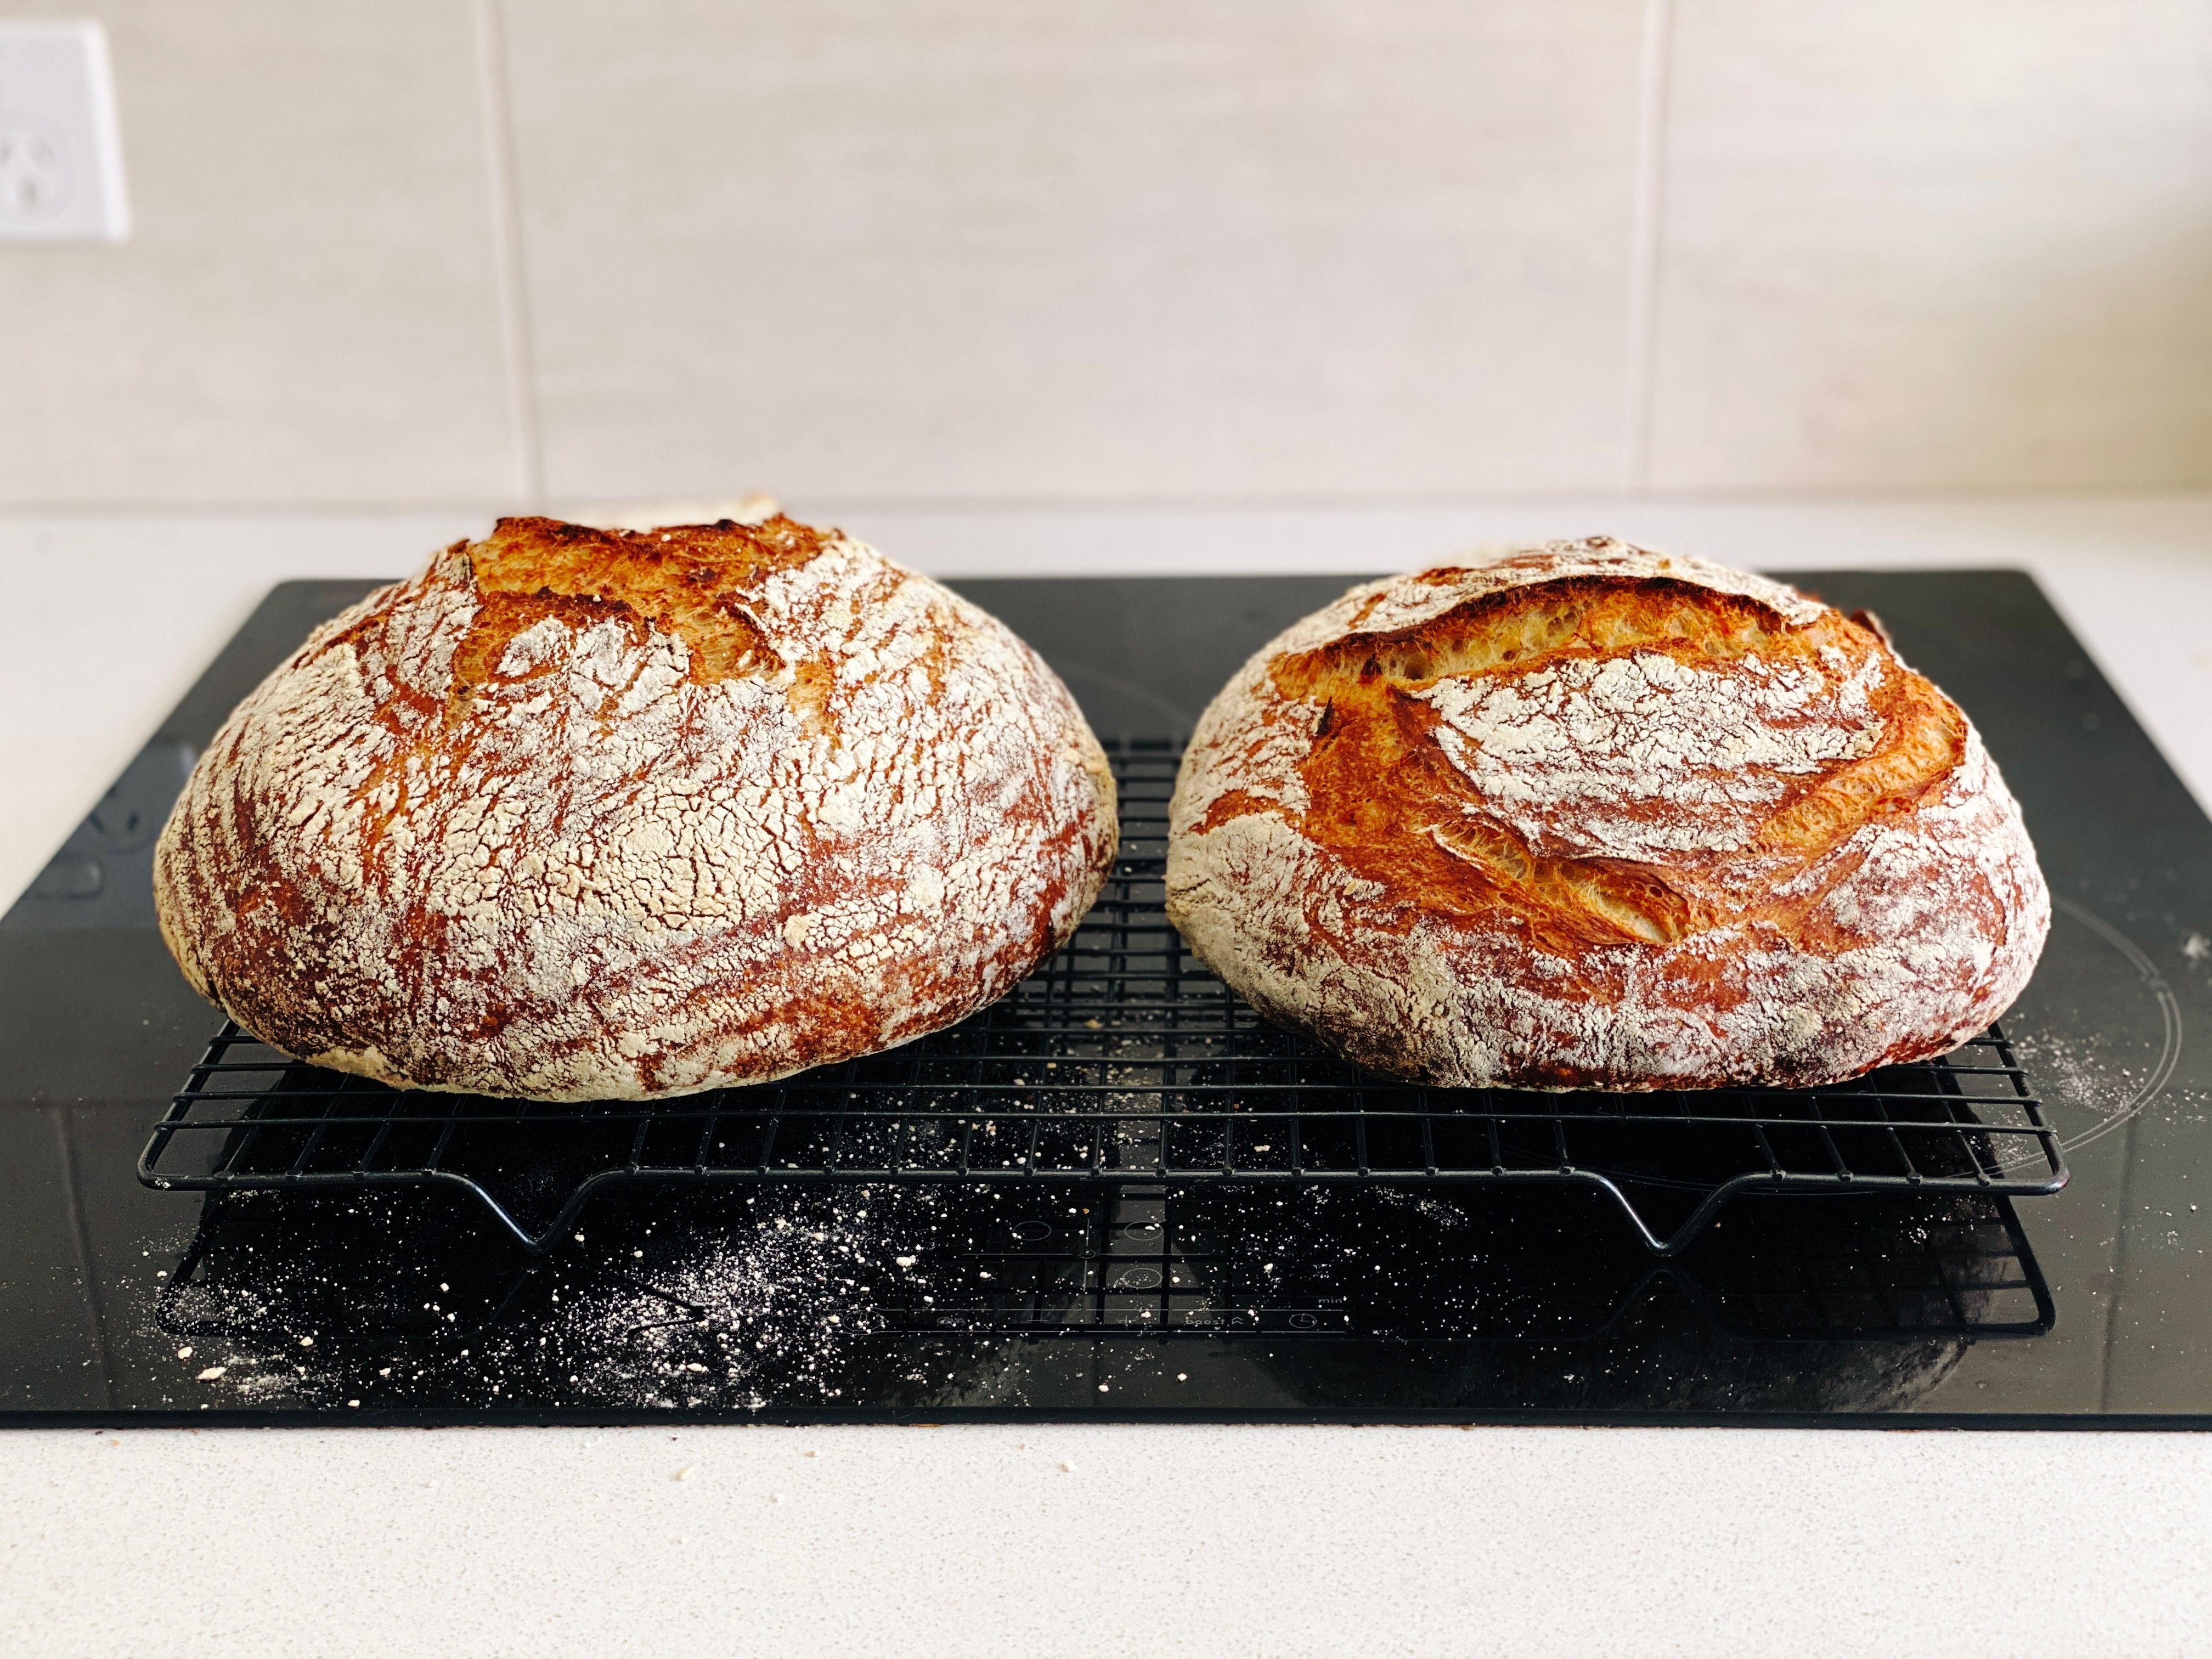 A photo of two round golden-brown loaves of bread covered in flour, sitting on a cooling rack.